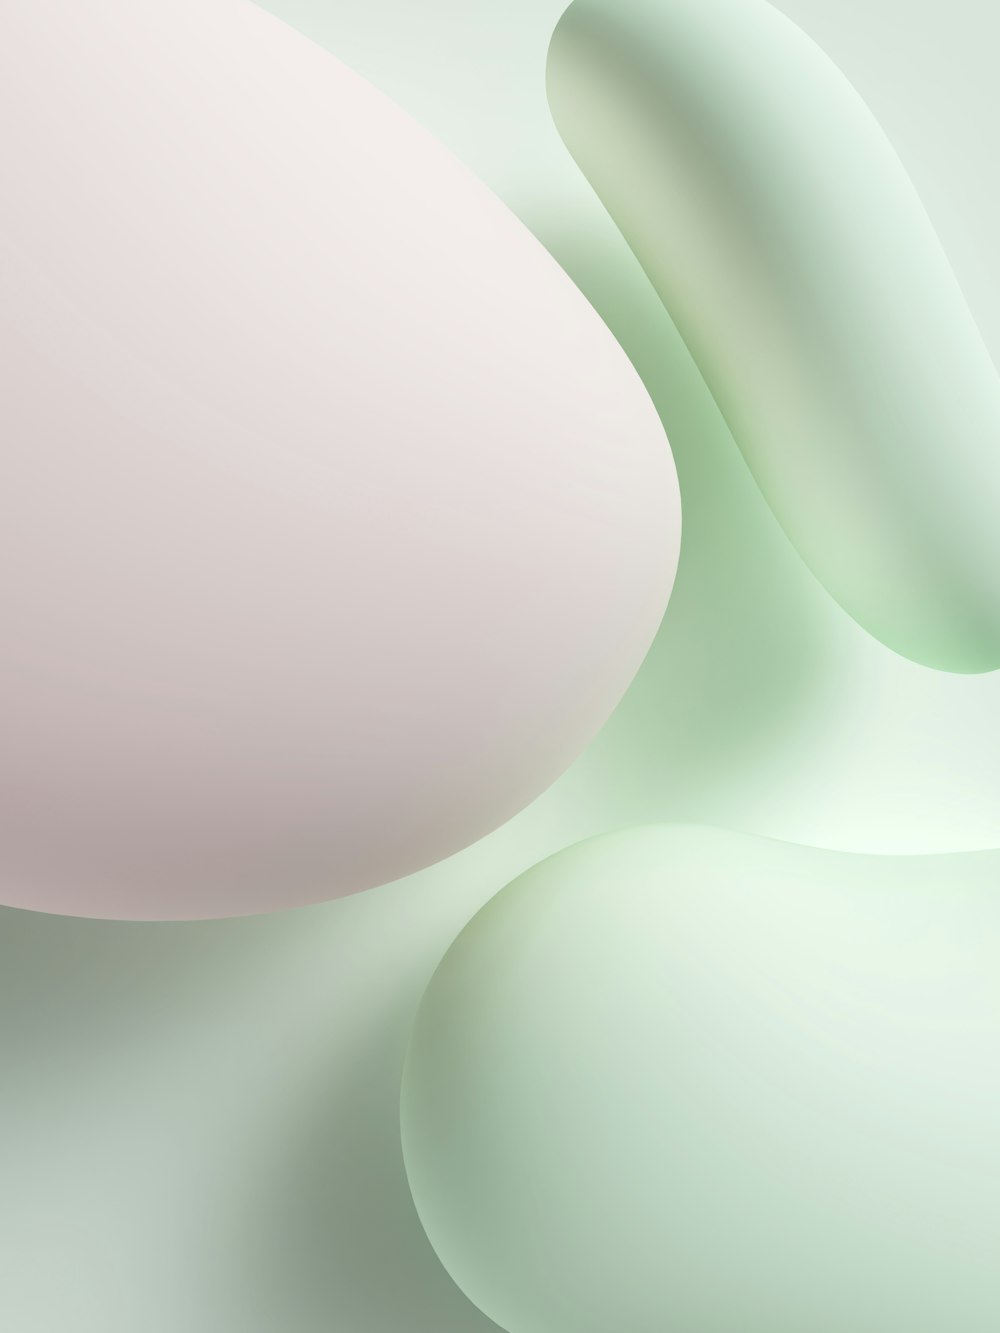 a close up of a white object with a light green background